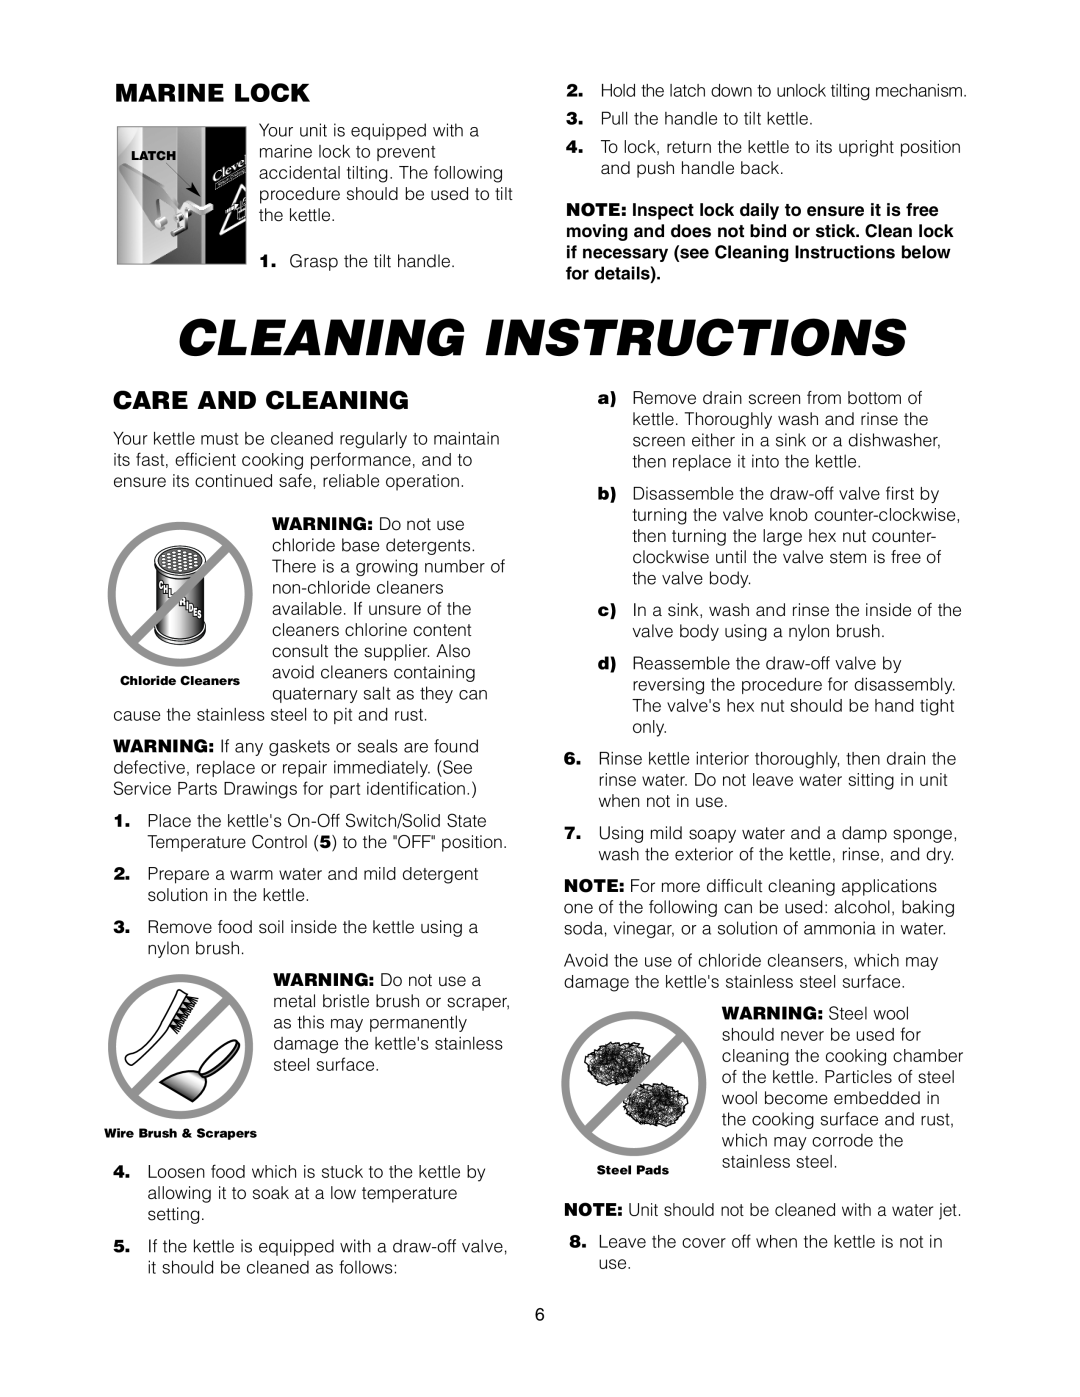 Cleveland Range KET-3-T manual Cleaning Instructions, Marine Lock, Care And Cleaning 